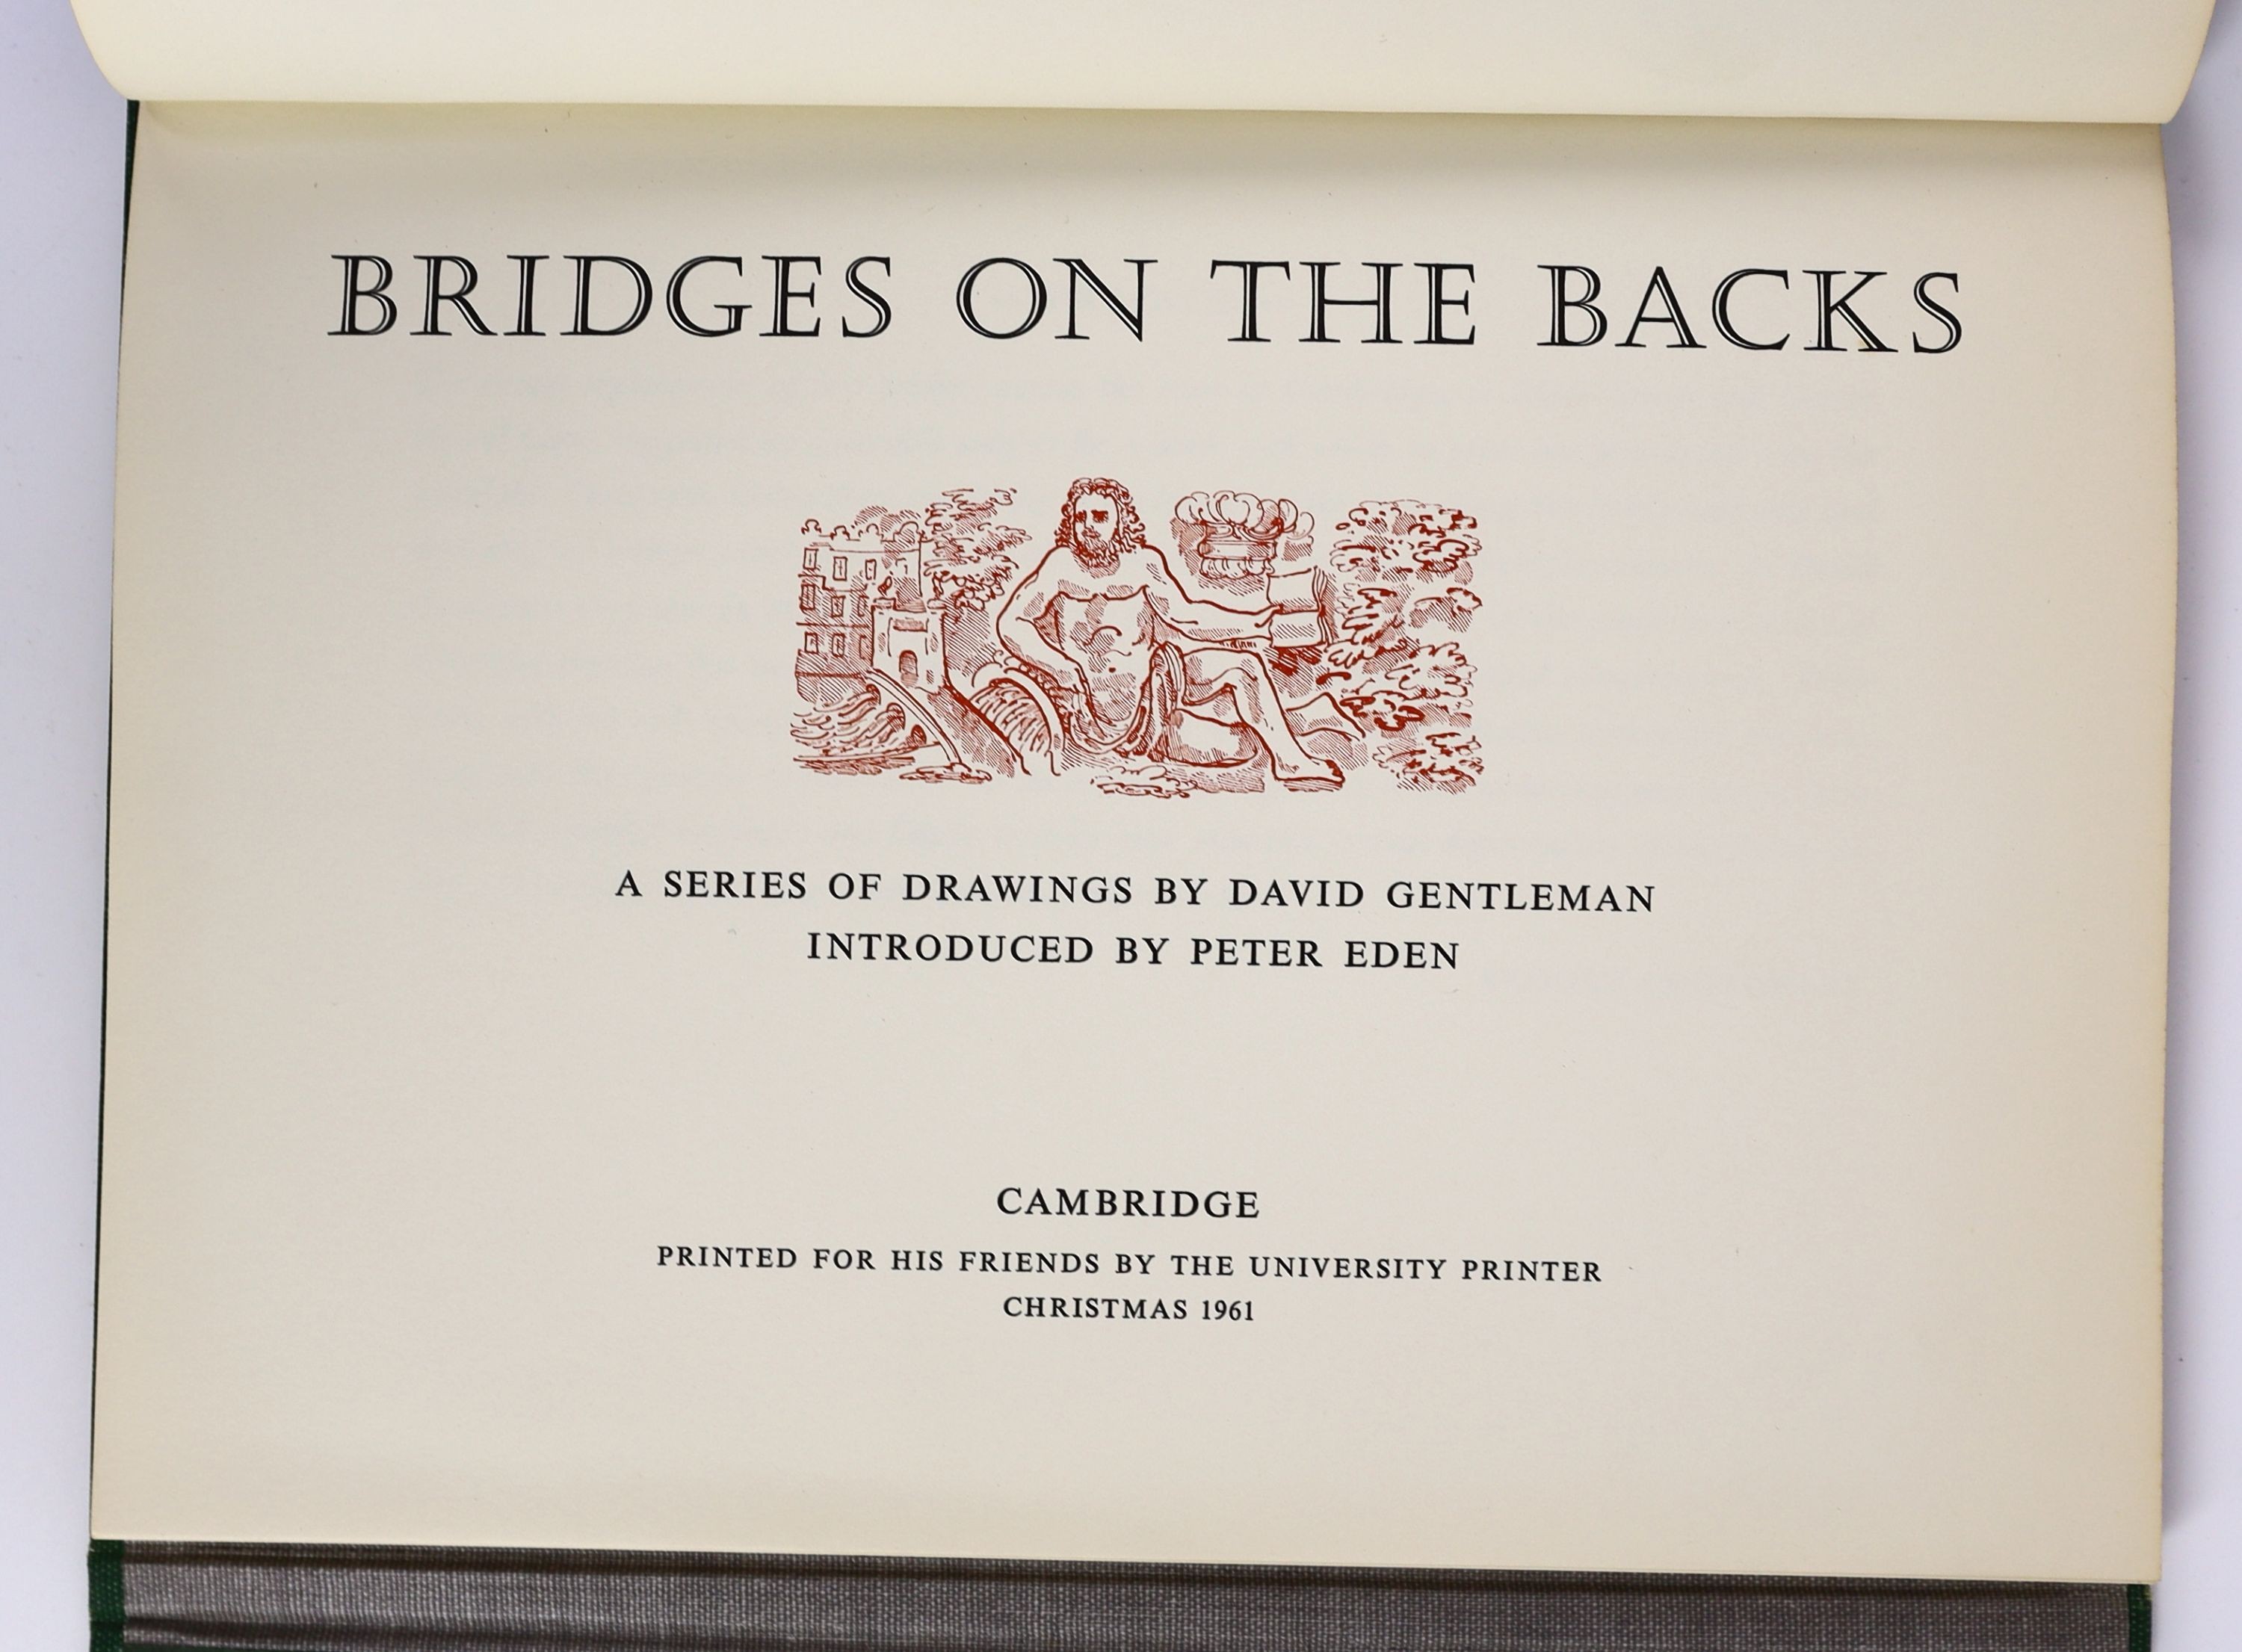 Gentleman, David - Bridges on the Backs. A Series of Drawings by…., one of 500, large 8vo, green cloth with a double hinged case, with 9 coloured plates, of which 6 have folding, Repton style, reveals. Printed for his fr